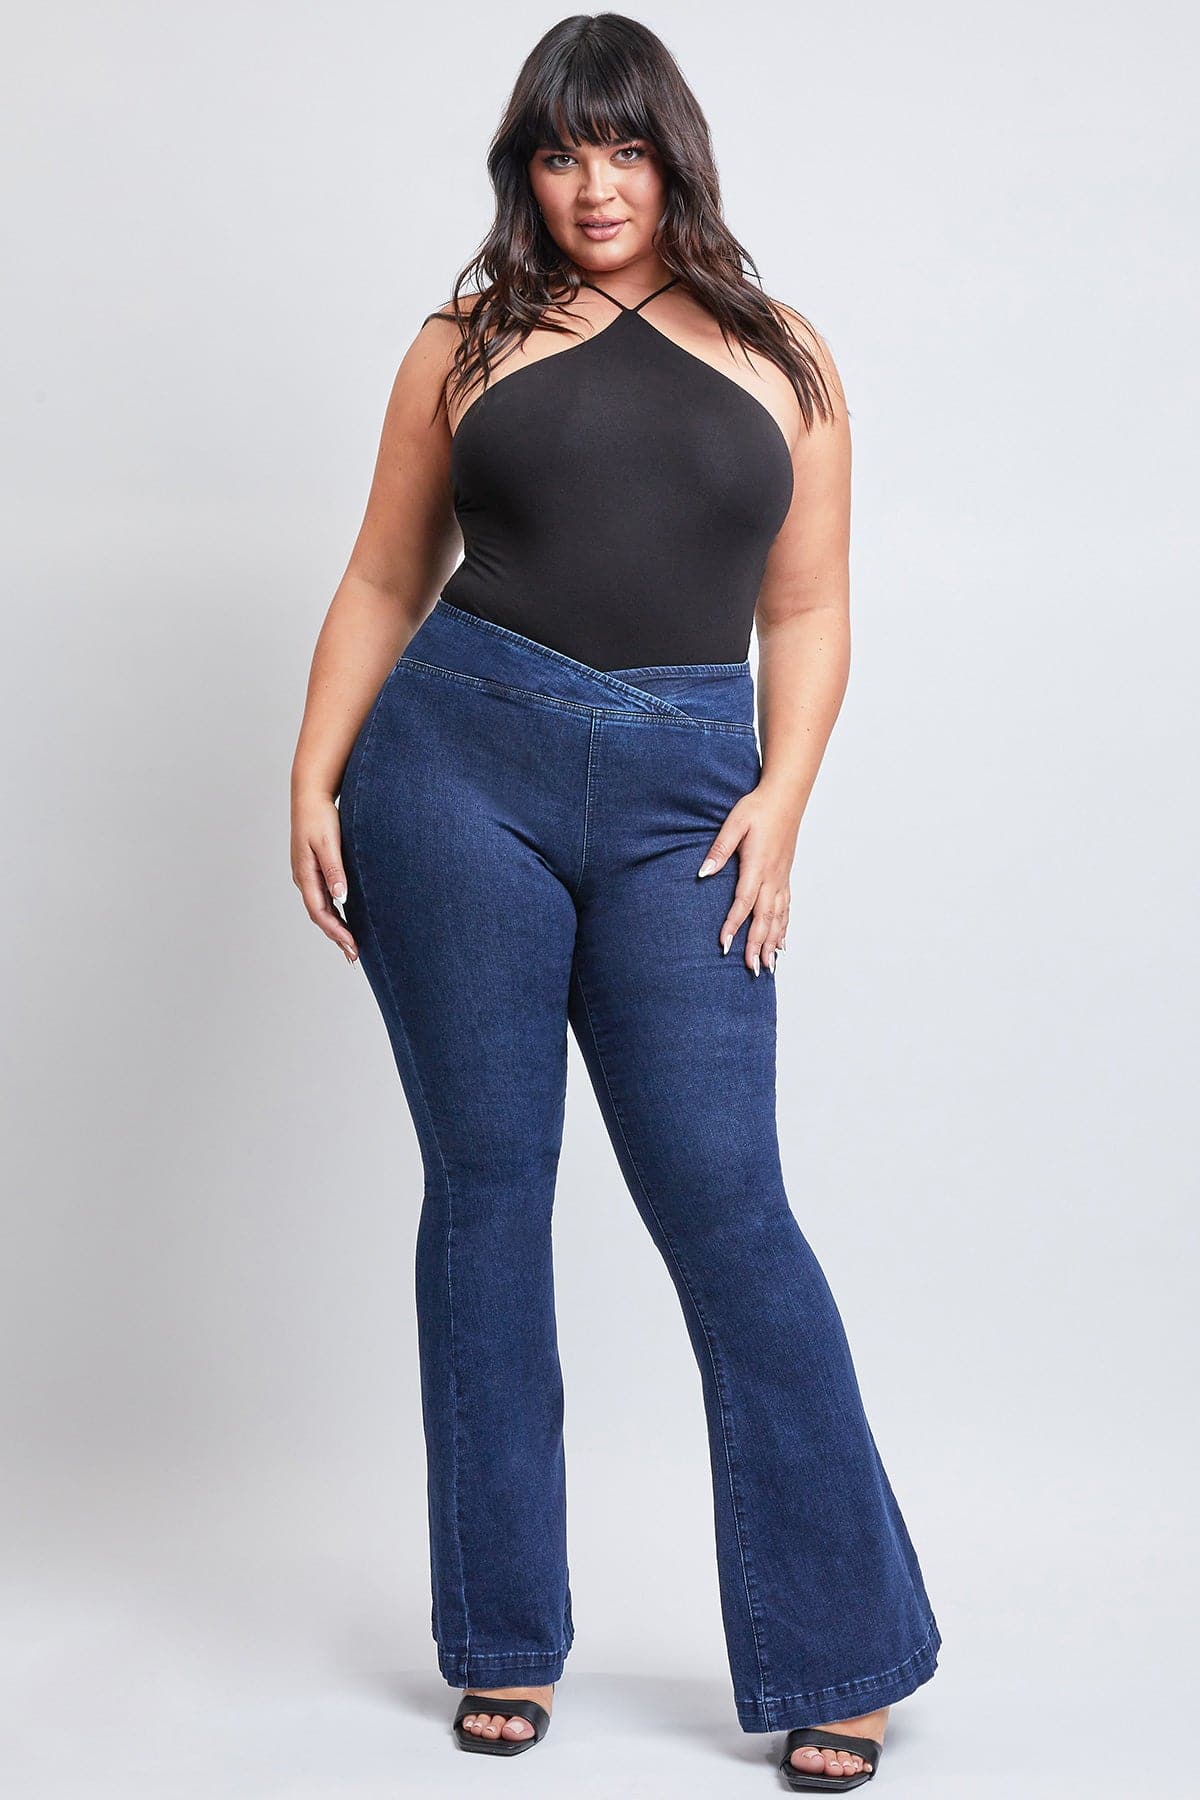 Women's Plus Size Pull On Jeans from – YMI